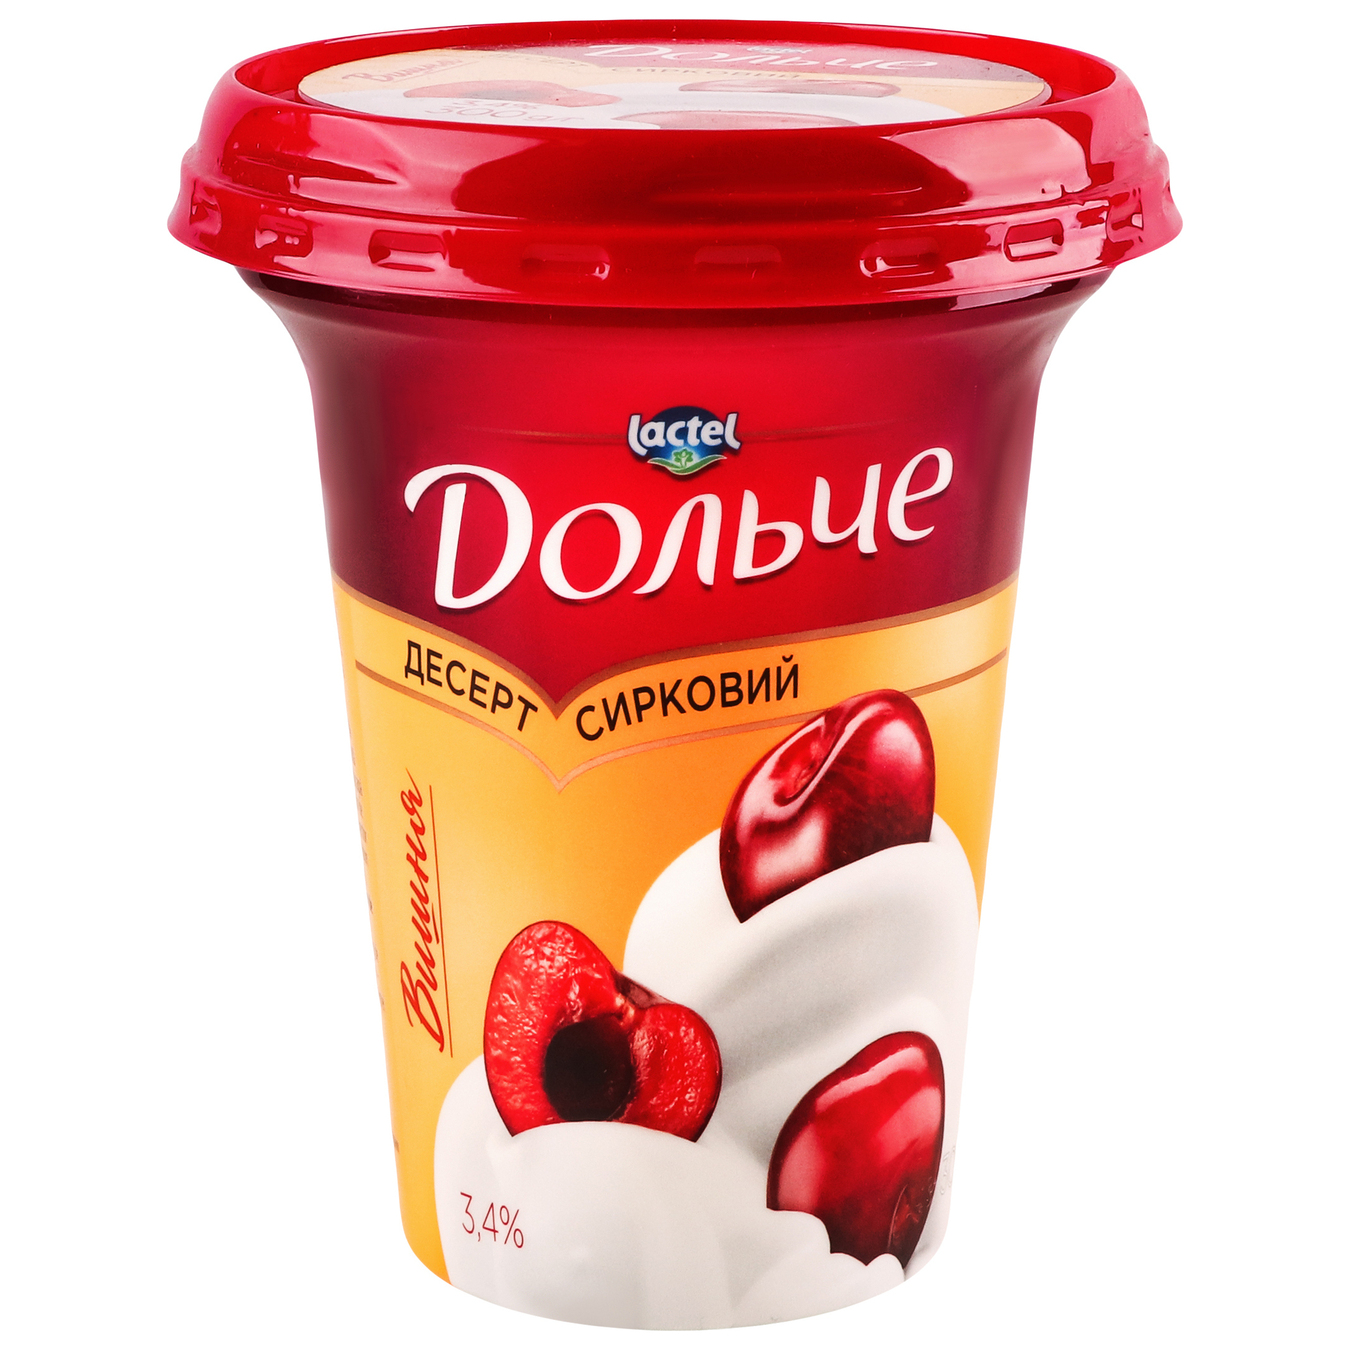 Dolce cottage cheese dessert with cherry filling 3.4% 300g 3